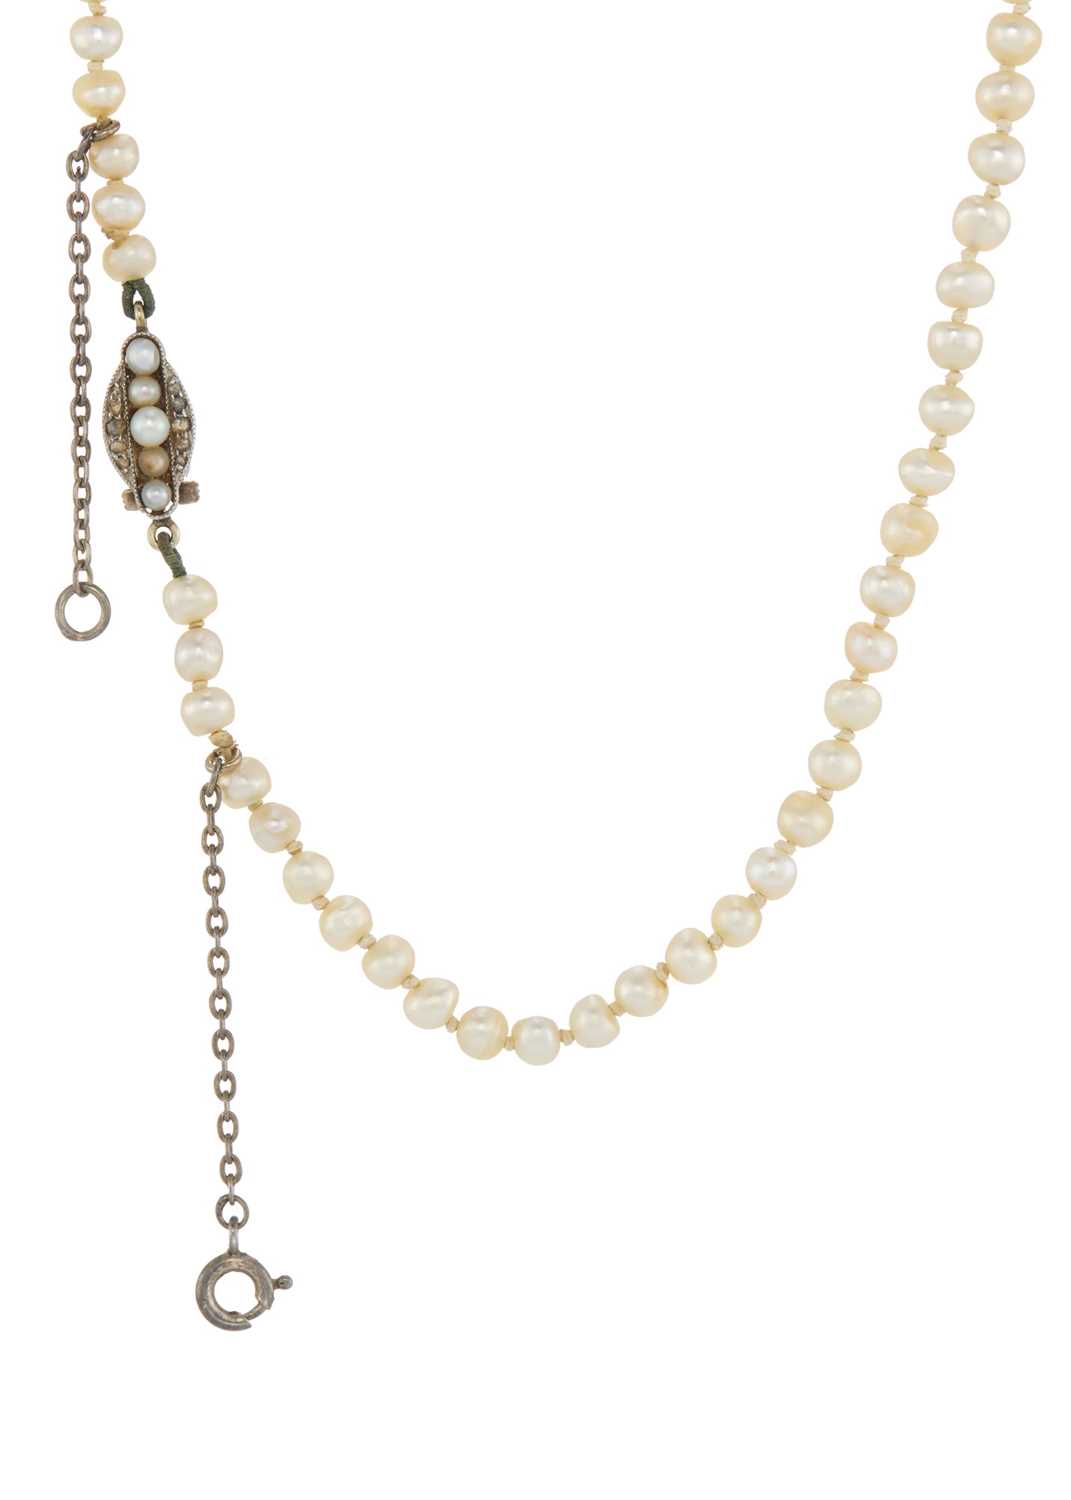 An early 20th century natural pearl necklace, with diamond clasp - Image 2 of 4